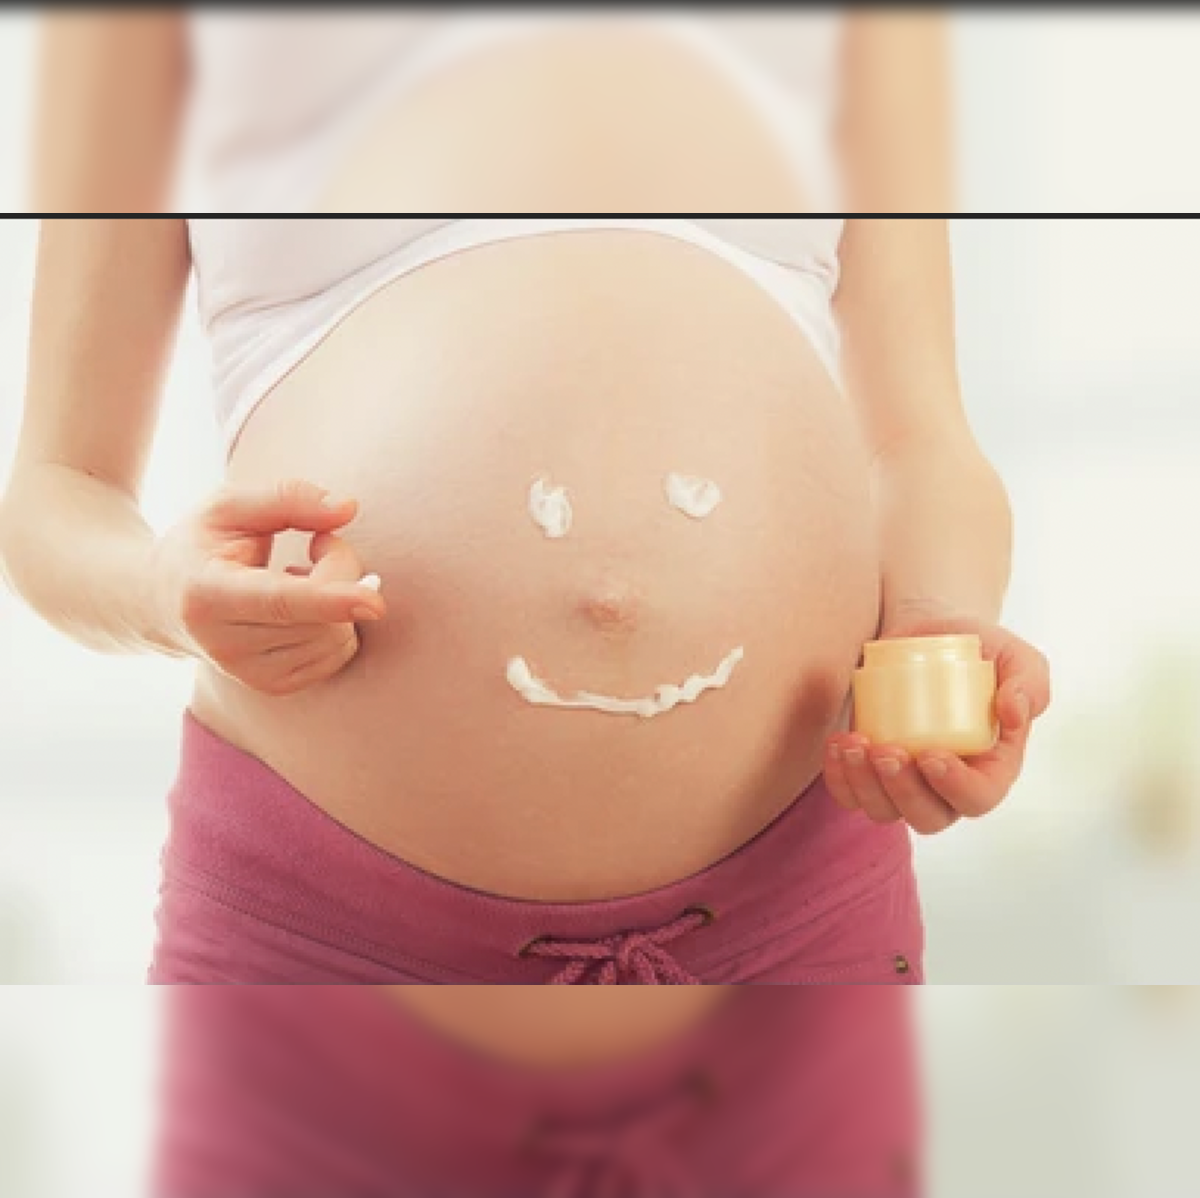 pregnancy skin care products: Maternity Skincare - 6 best pregnancy skin  care products - The Economic Times